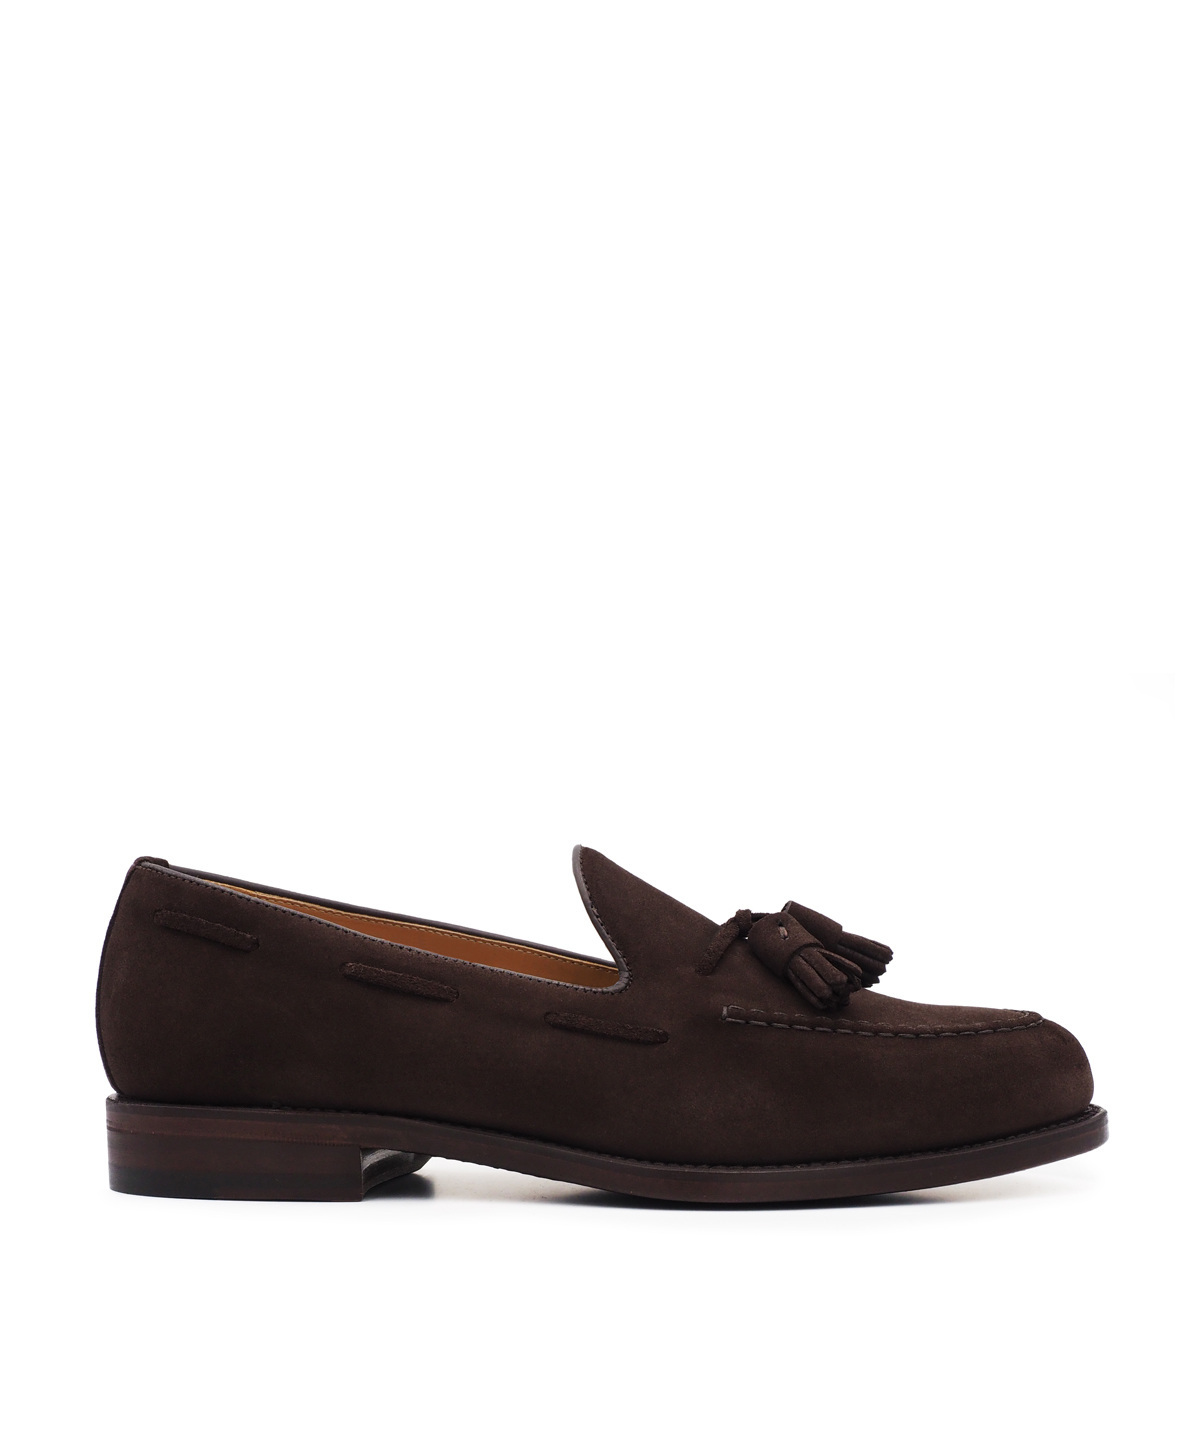 Mens Shoes Slip-on shoes Loafers Doucals Suede Fringe-detail Loafers in Brown for Men 